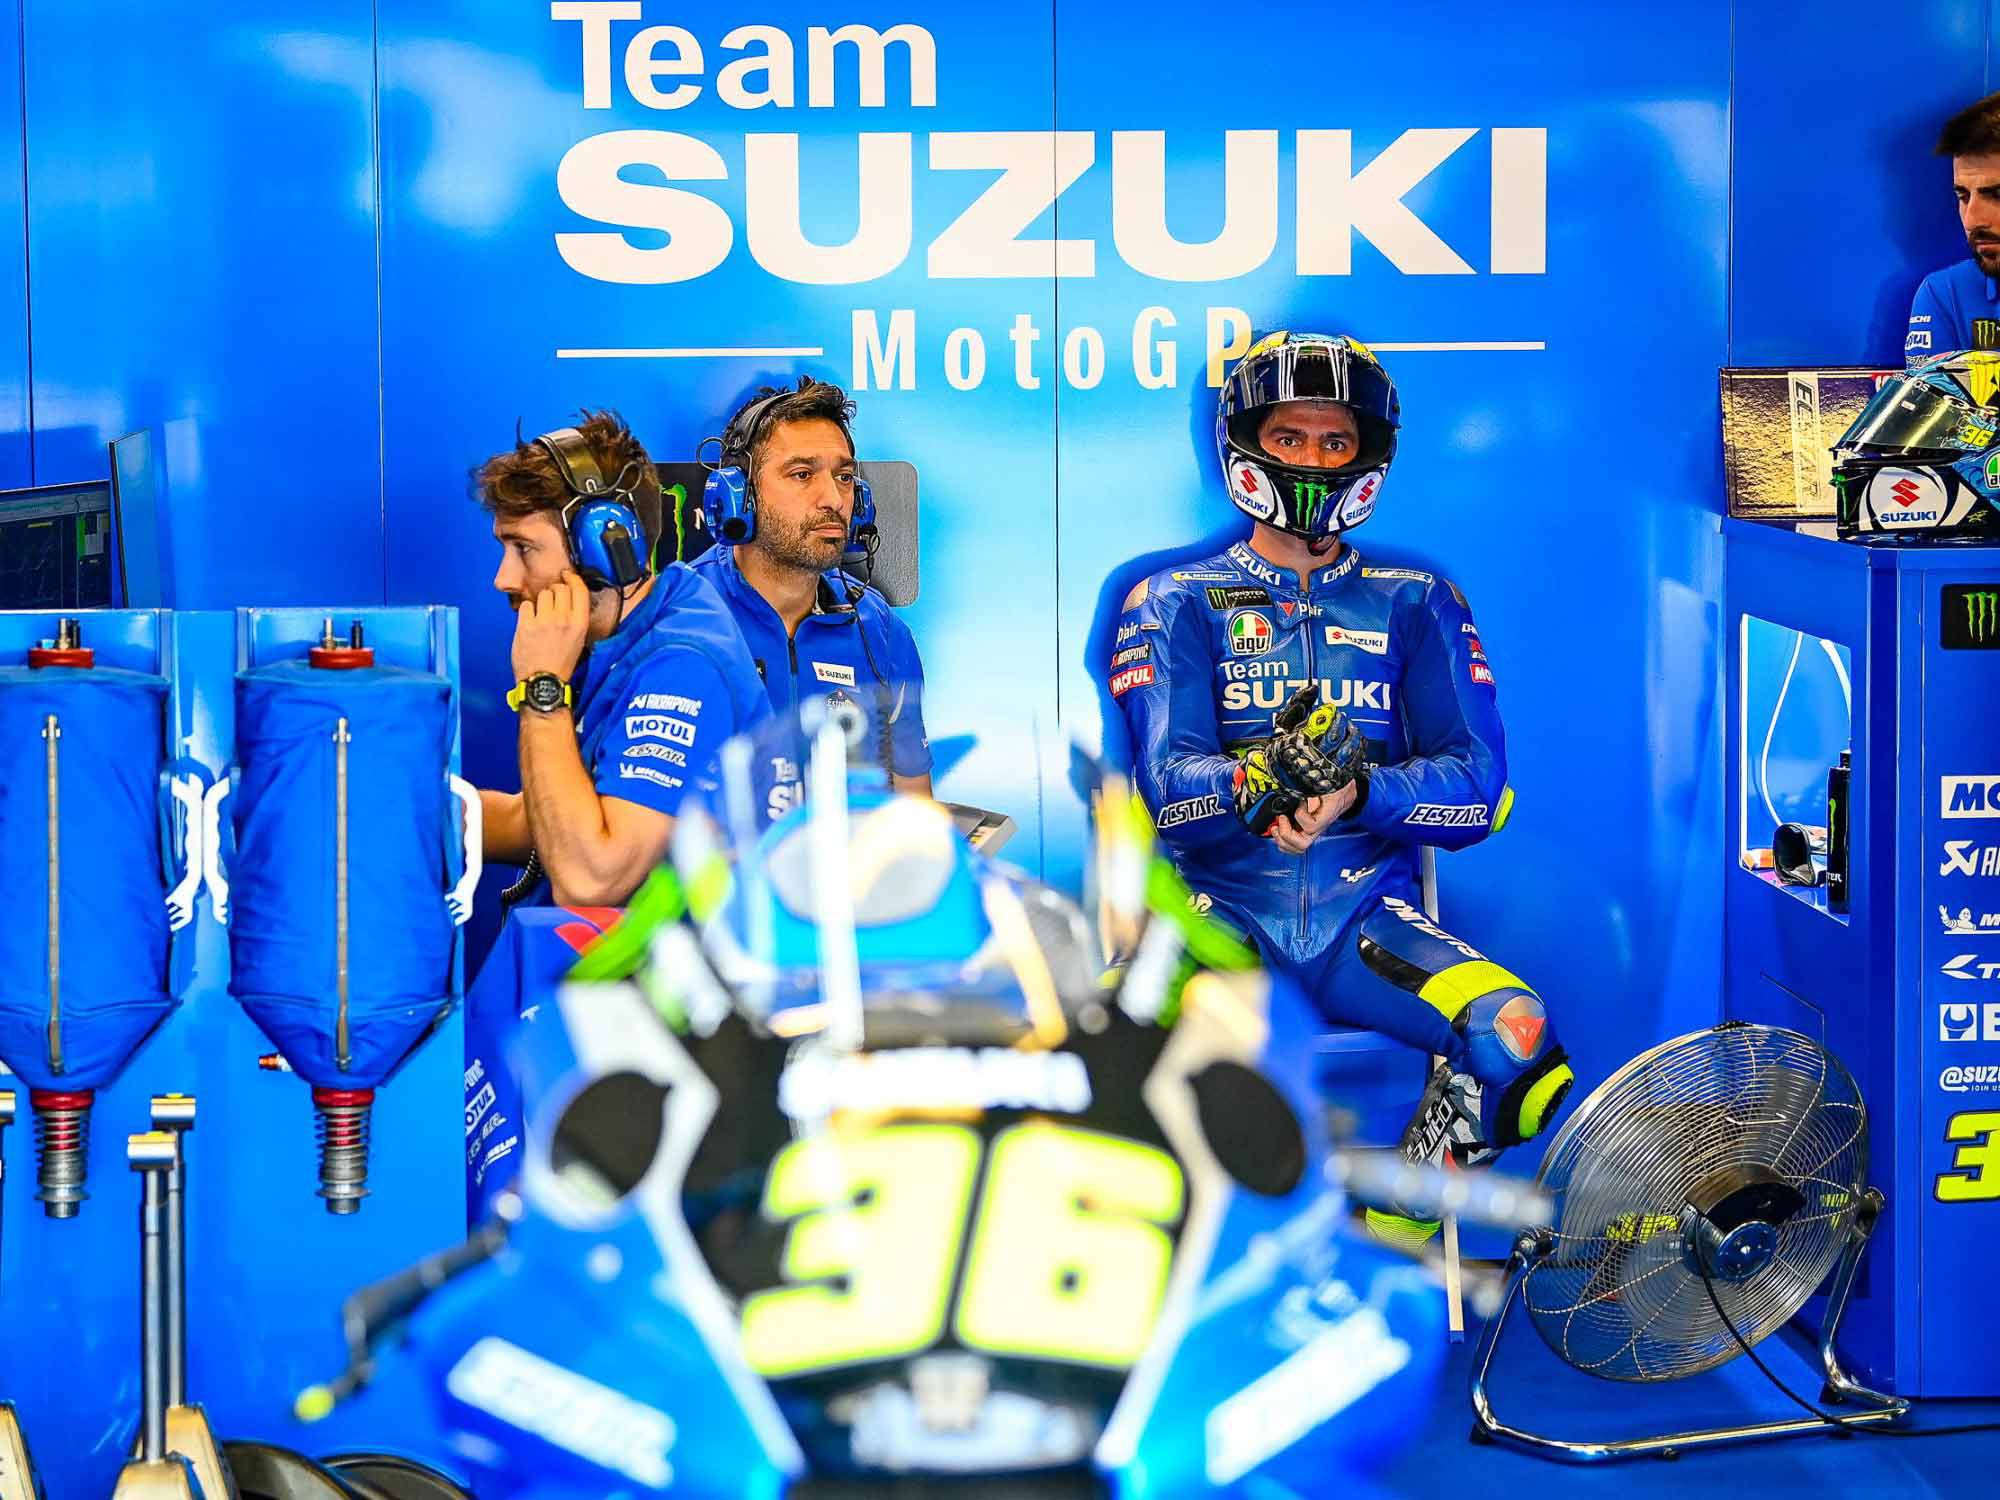 Despite leaving MotoGP, Suzuki says it remains committed to the motorcycle and ATV business, as well as MotoAmerica, AMA Supercross, AMA Motocross and NHRA Pro Stock Drag Racing.